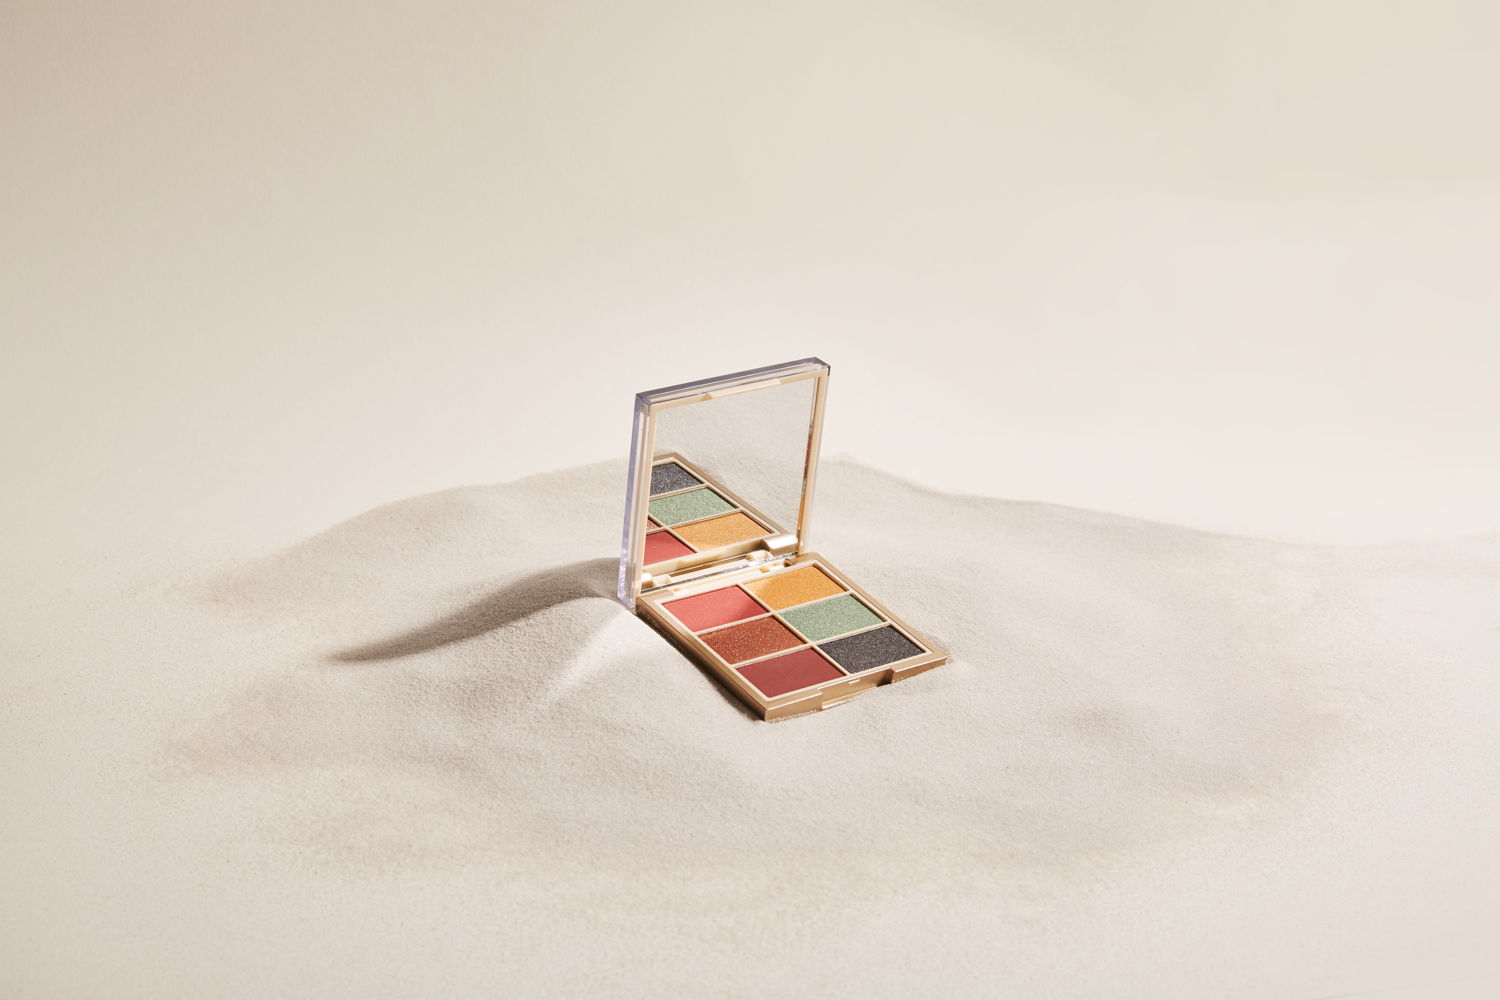 ONLY YOU CORAL REEF PALETTE 